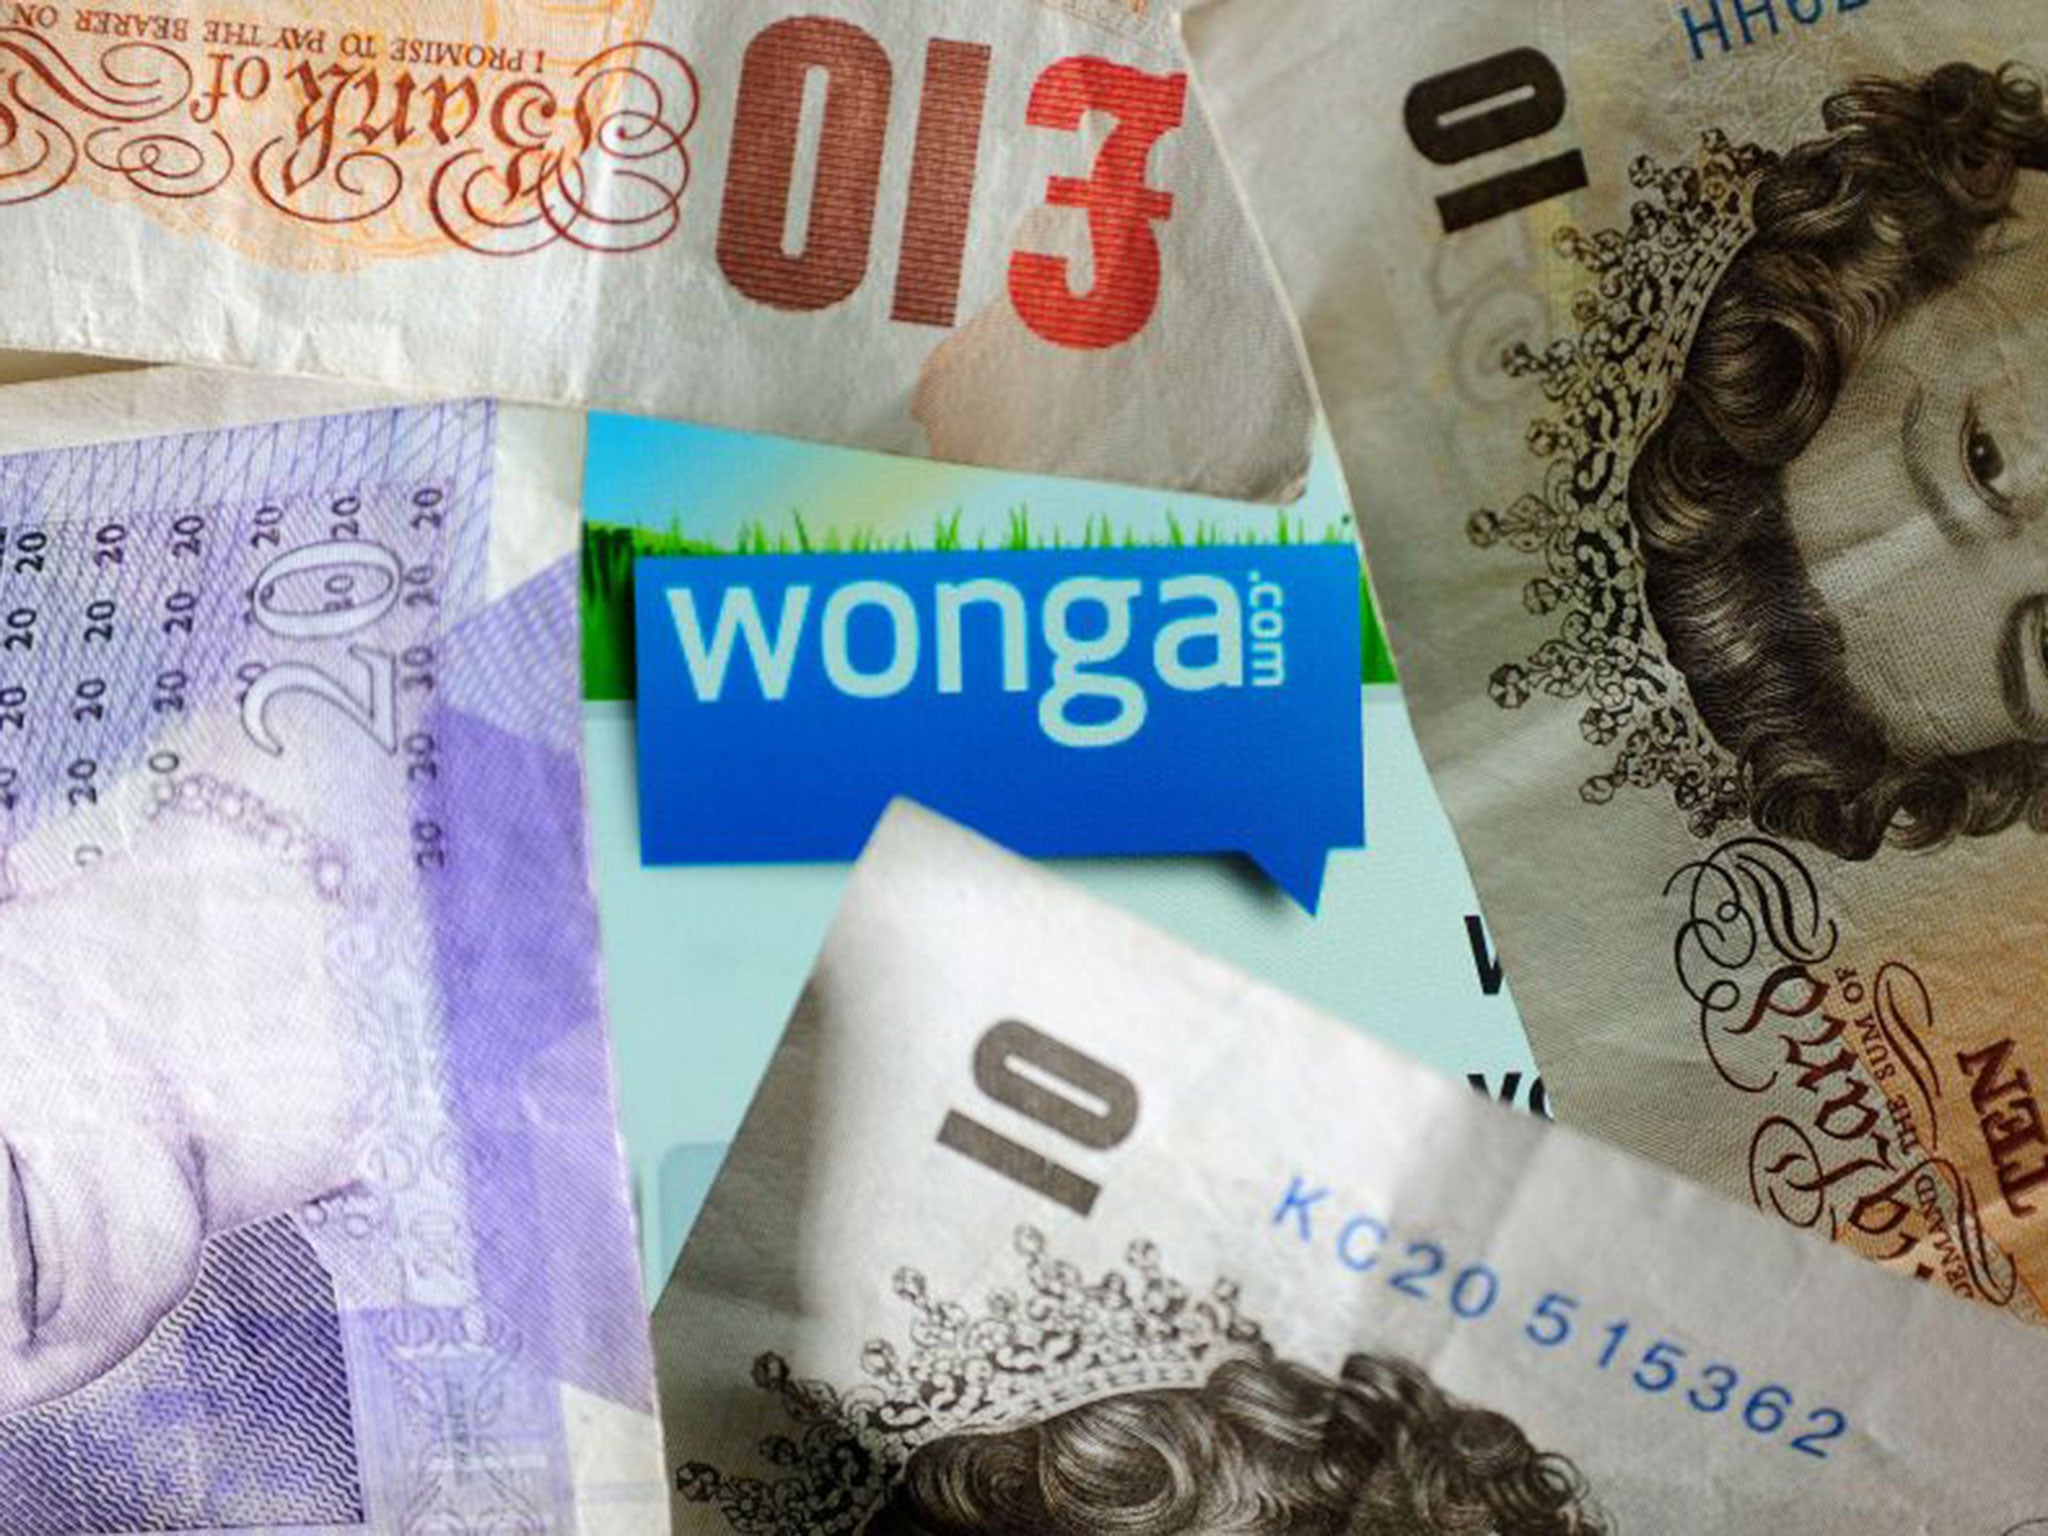 It was announced today that some 330,000 borrowers will have their Wonga debts written off at a cost of £220m